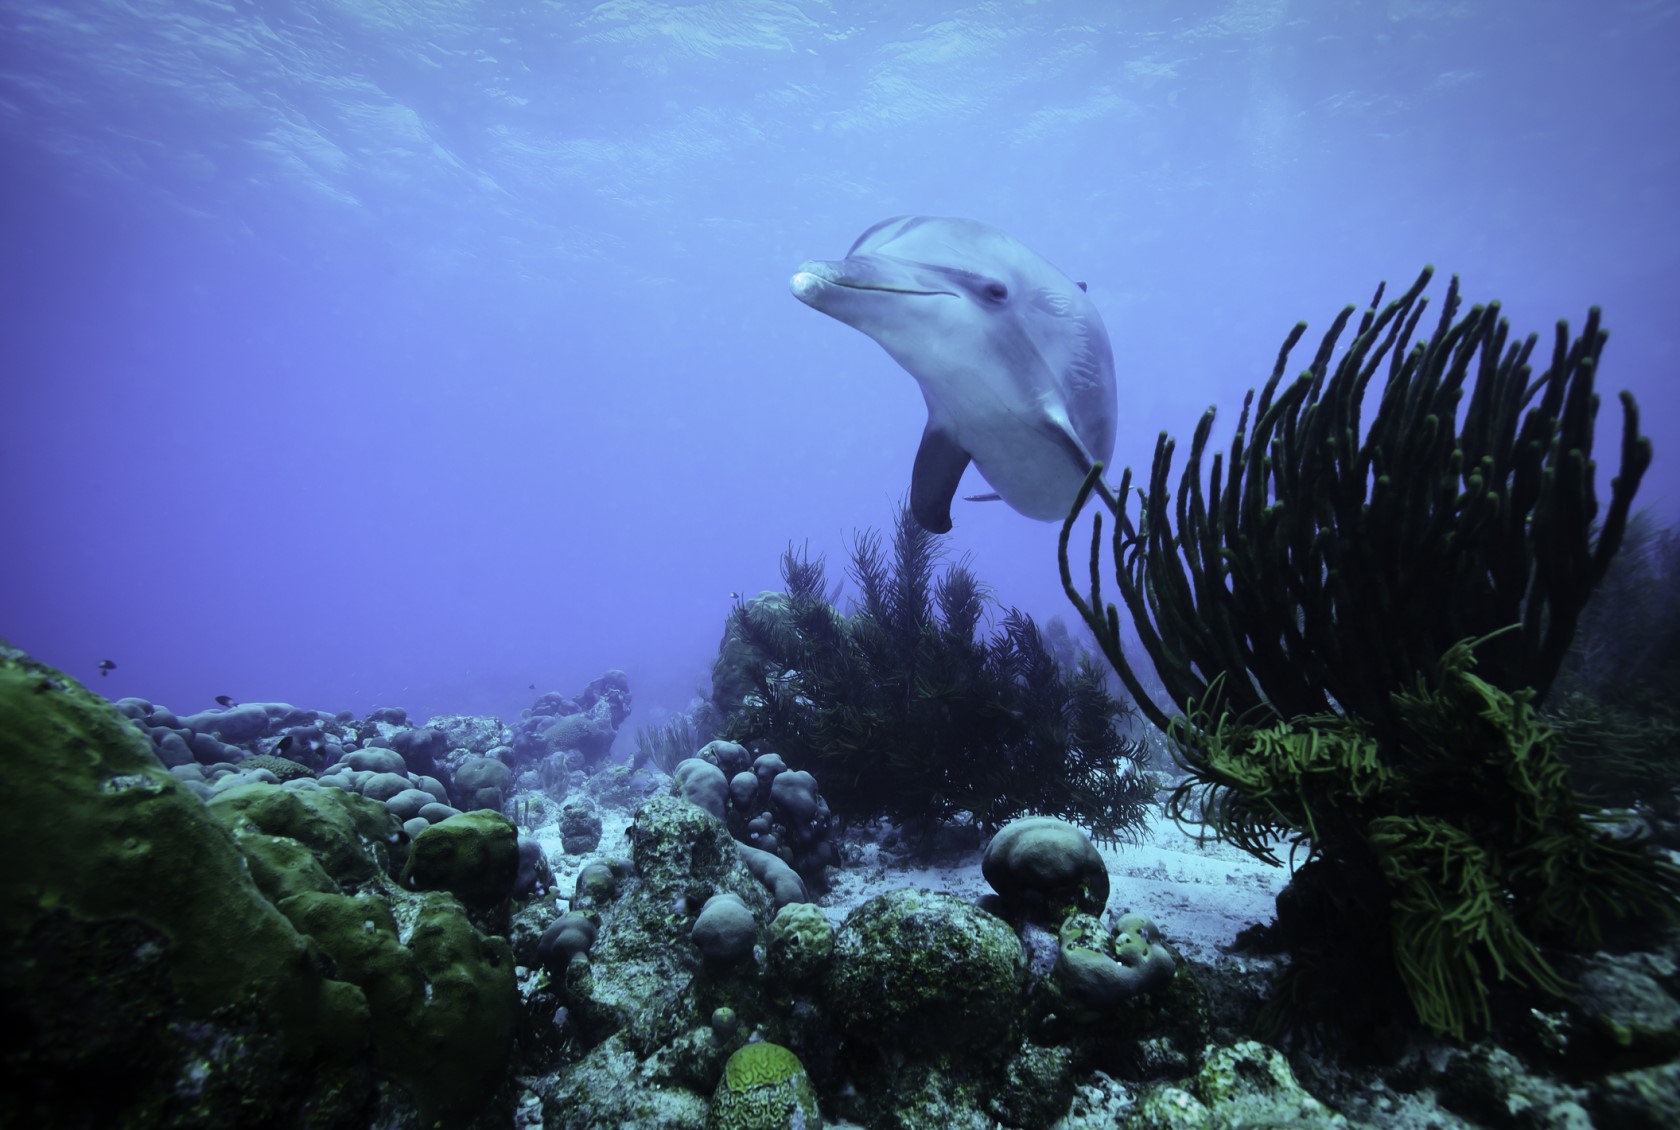 A curious dolphin in the clear blue waters of the Caribbean